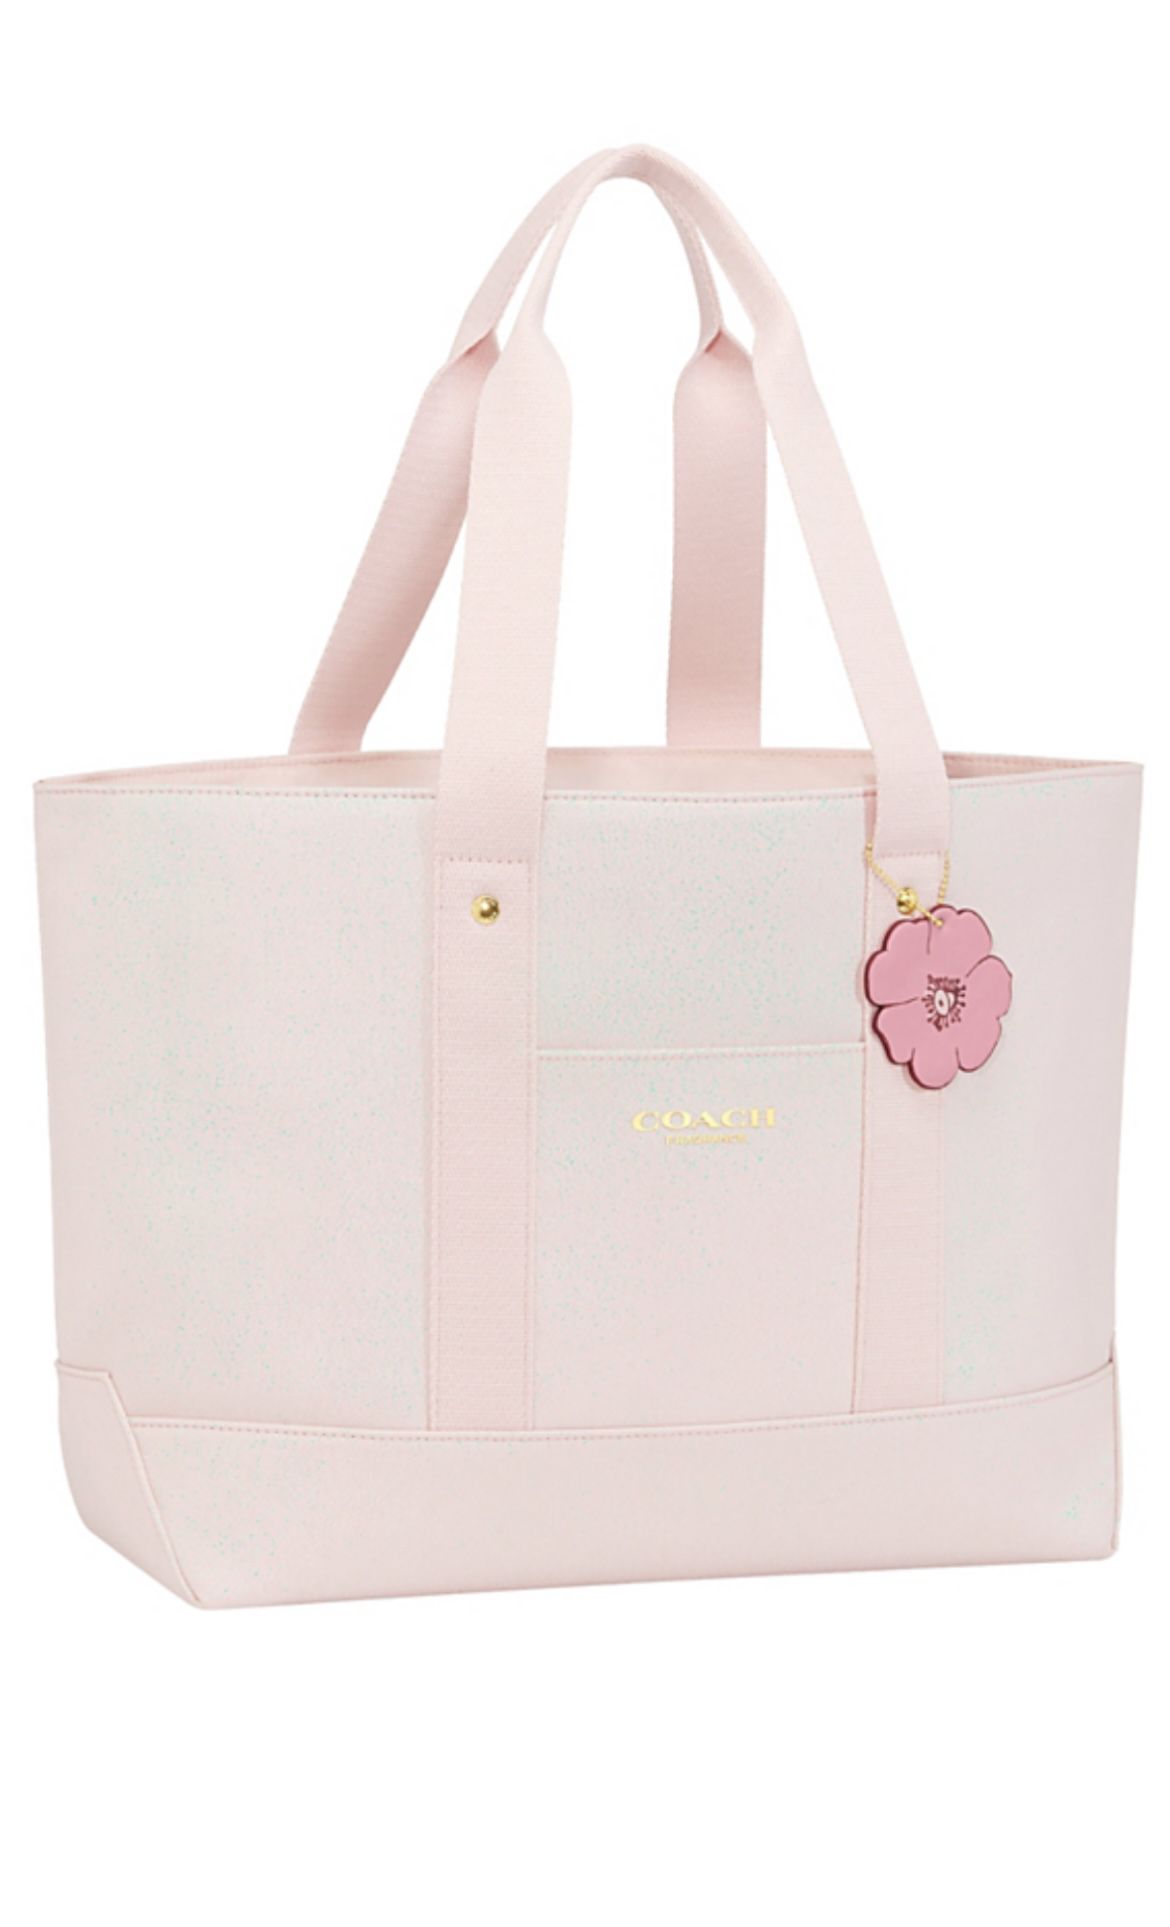 Coach Pink Tote Bag for Women - BRAND NEW